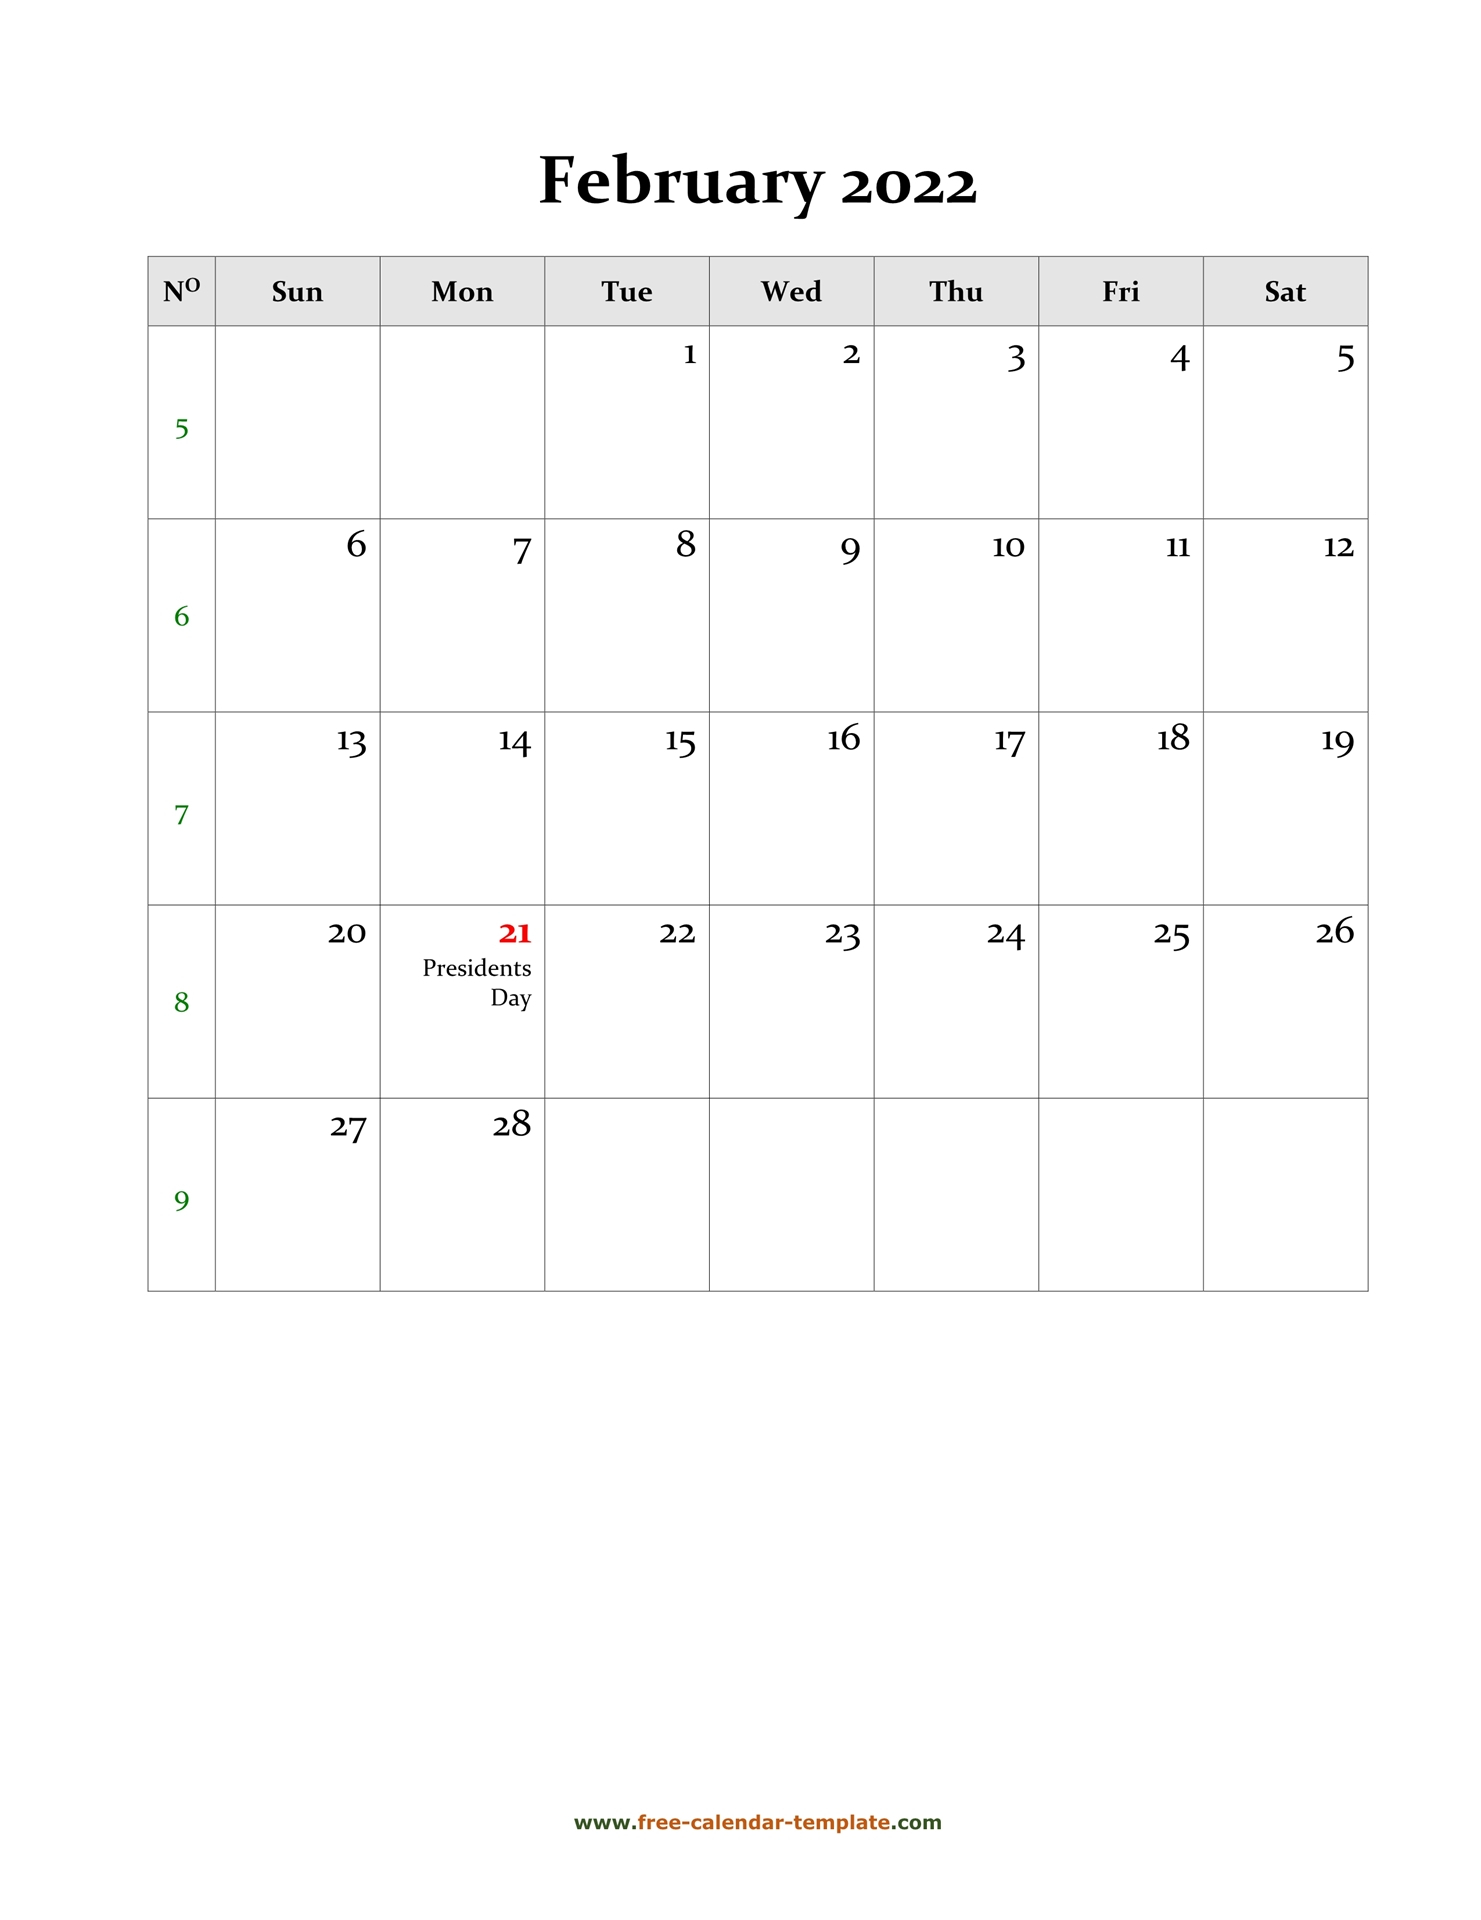 Get Calendar For January And February 2022